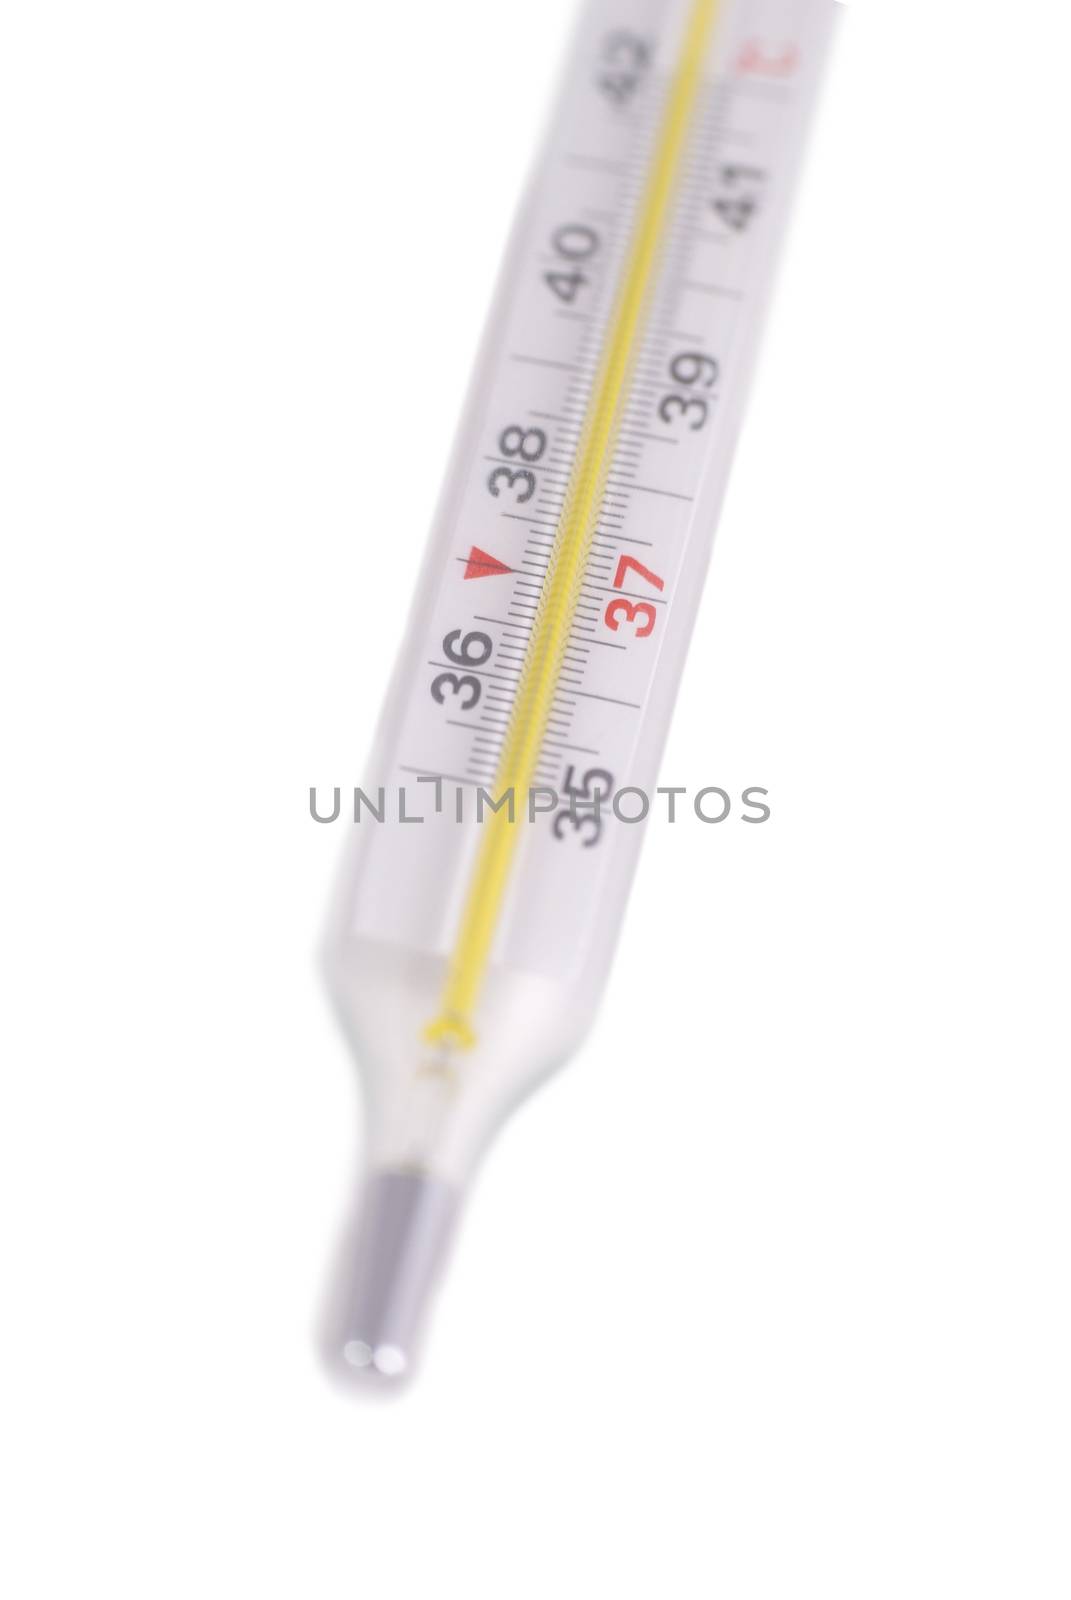 Medical thermometer by vapi